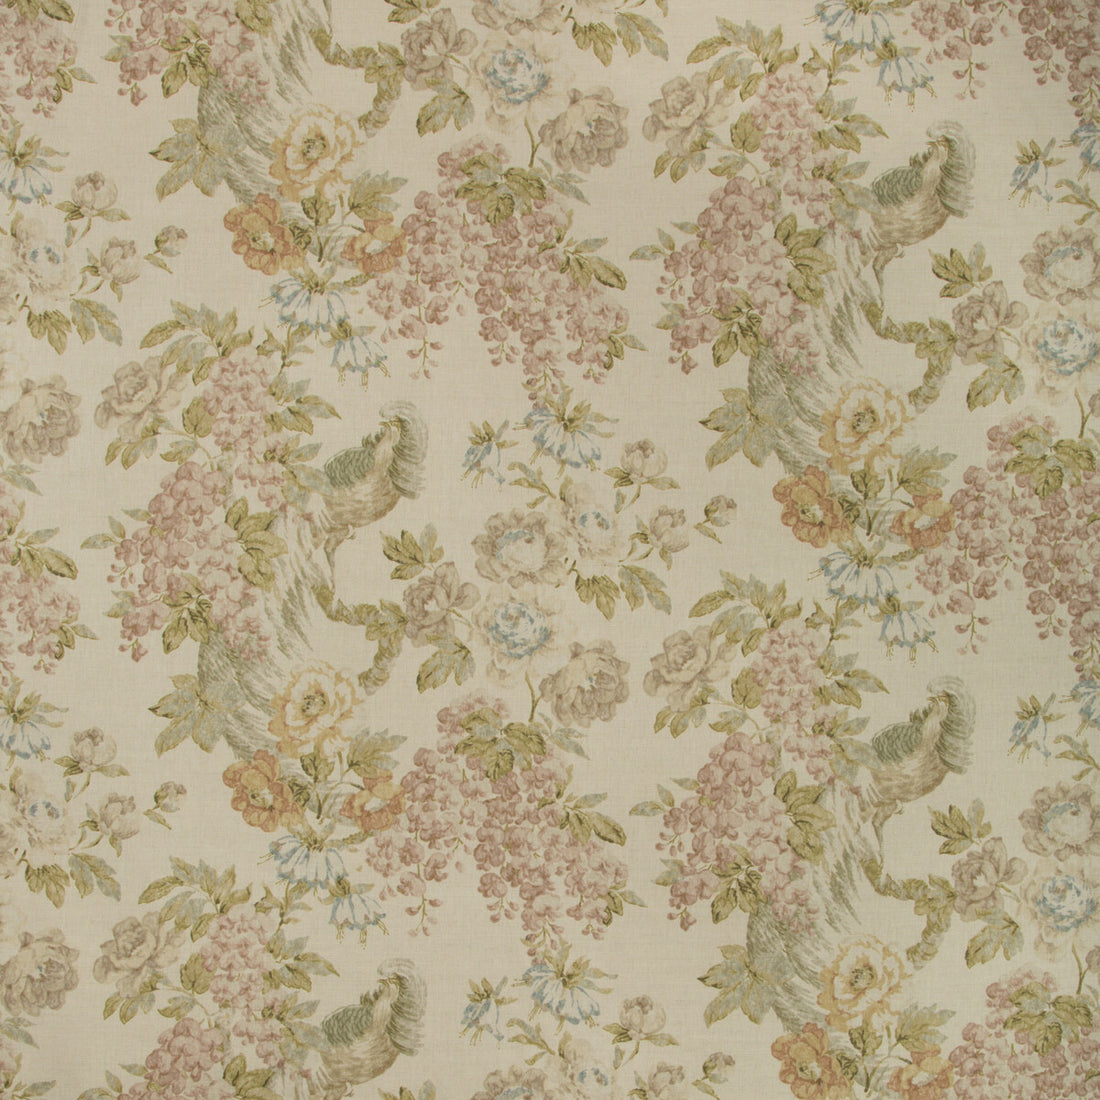 Montecito Floral fabric in olive/plum color - pattern 2018139.103.0 - by Lee Jofa in the Suzanne Rheinstein III collection